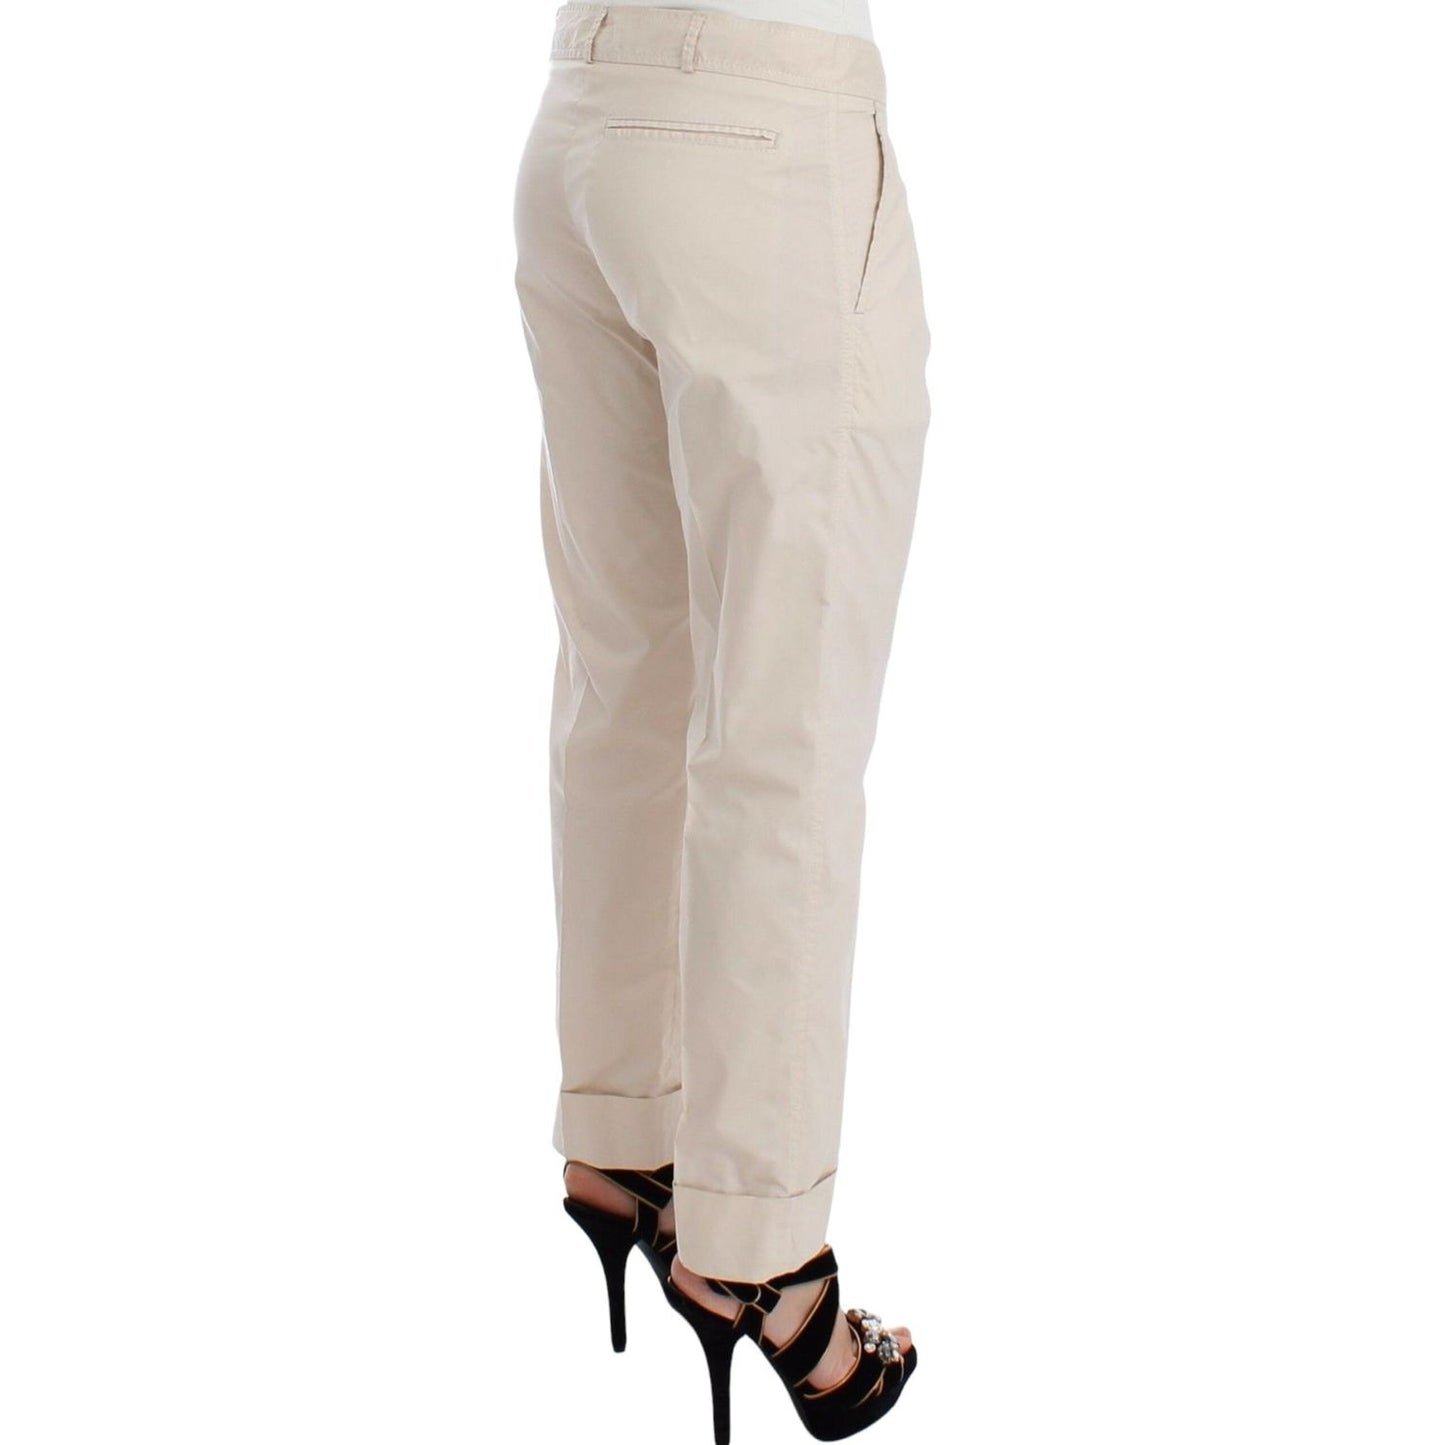 Ermanno Scervino Chic Beige Chino Pants - Elegance Redefined Jeans & Pants beige-chinos-casual-dress-pants-khakis